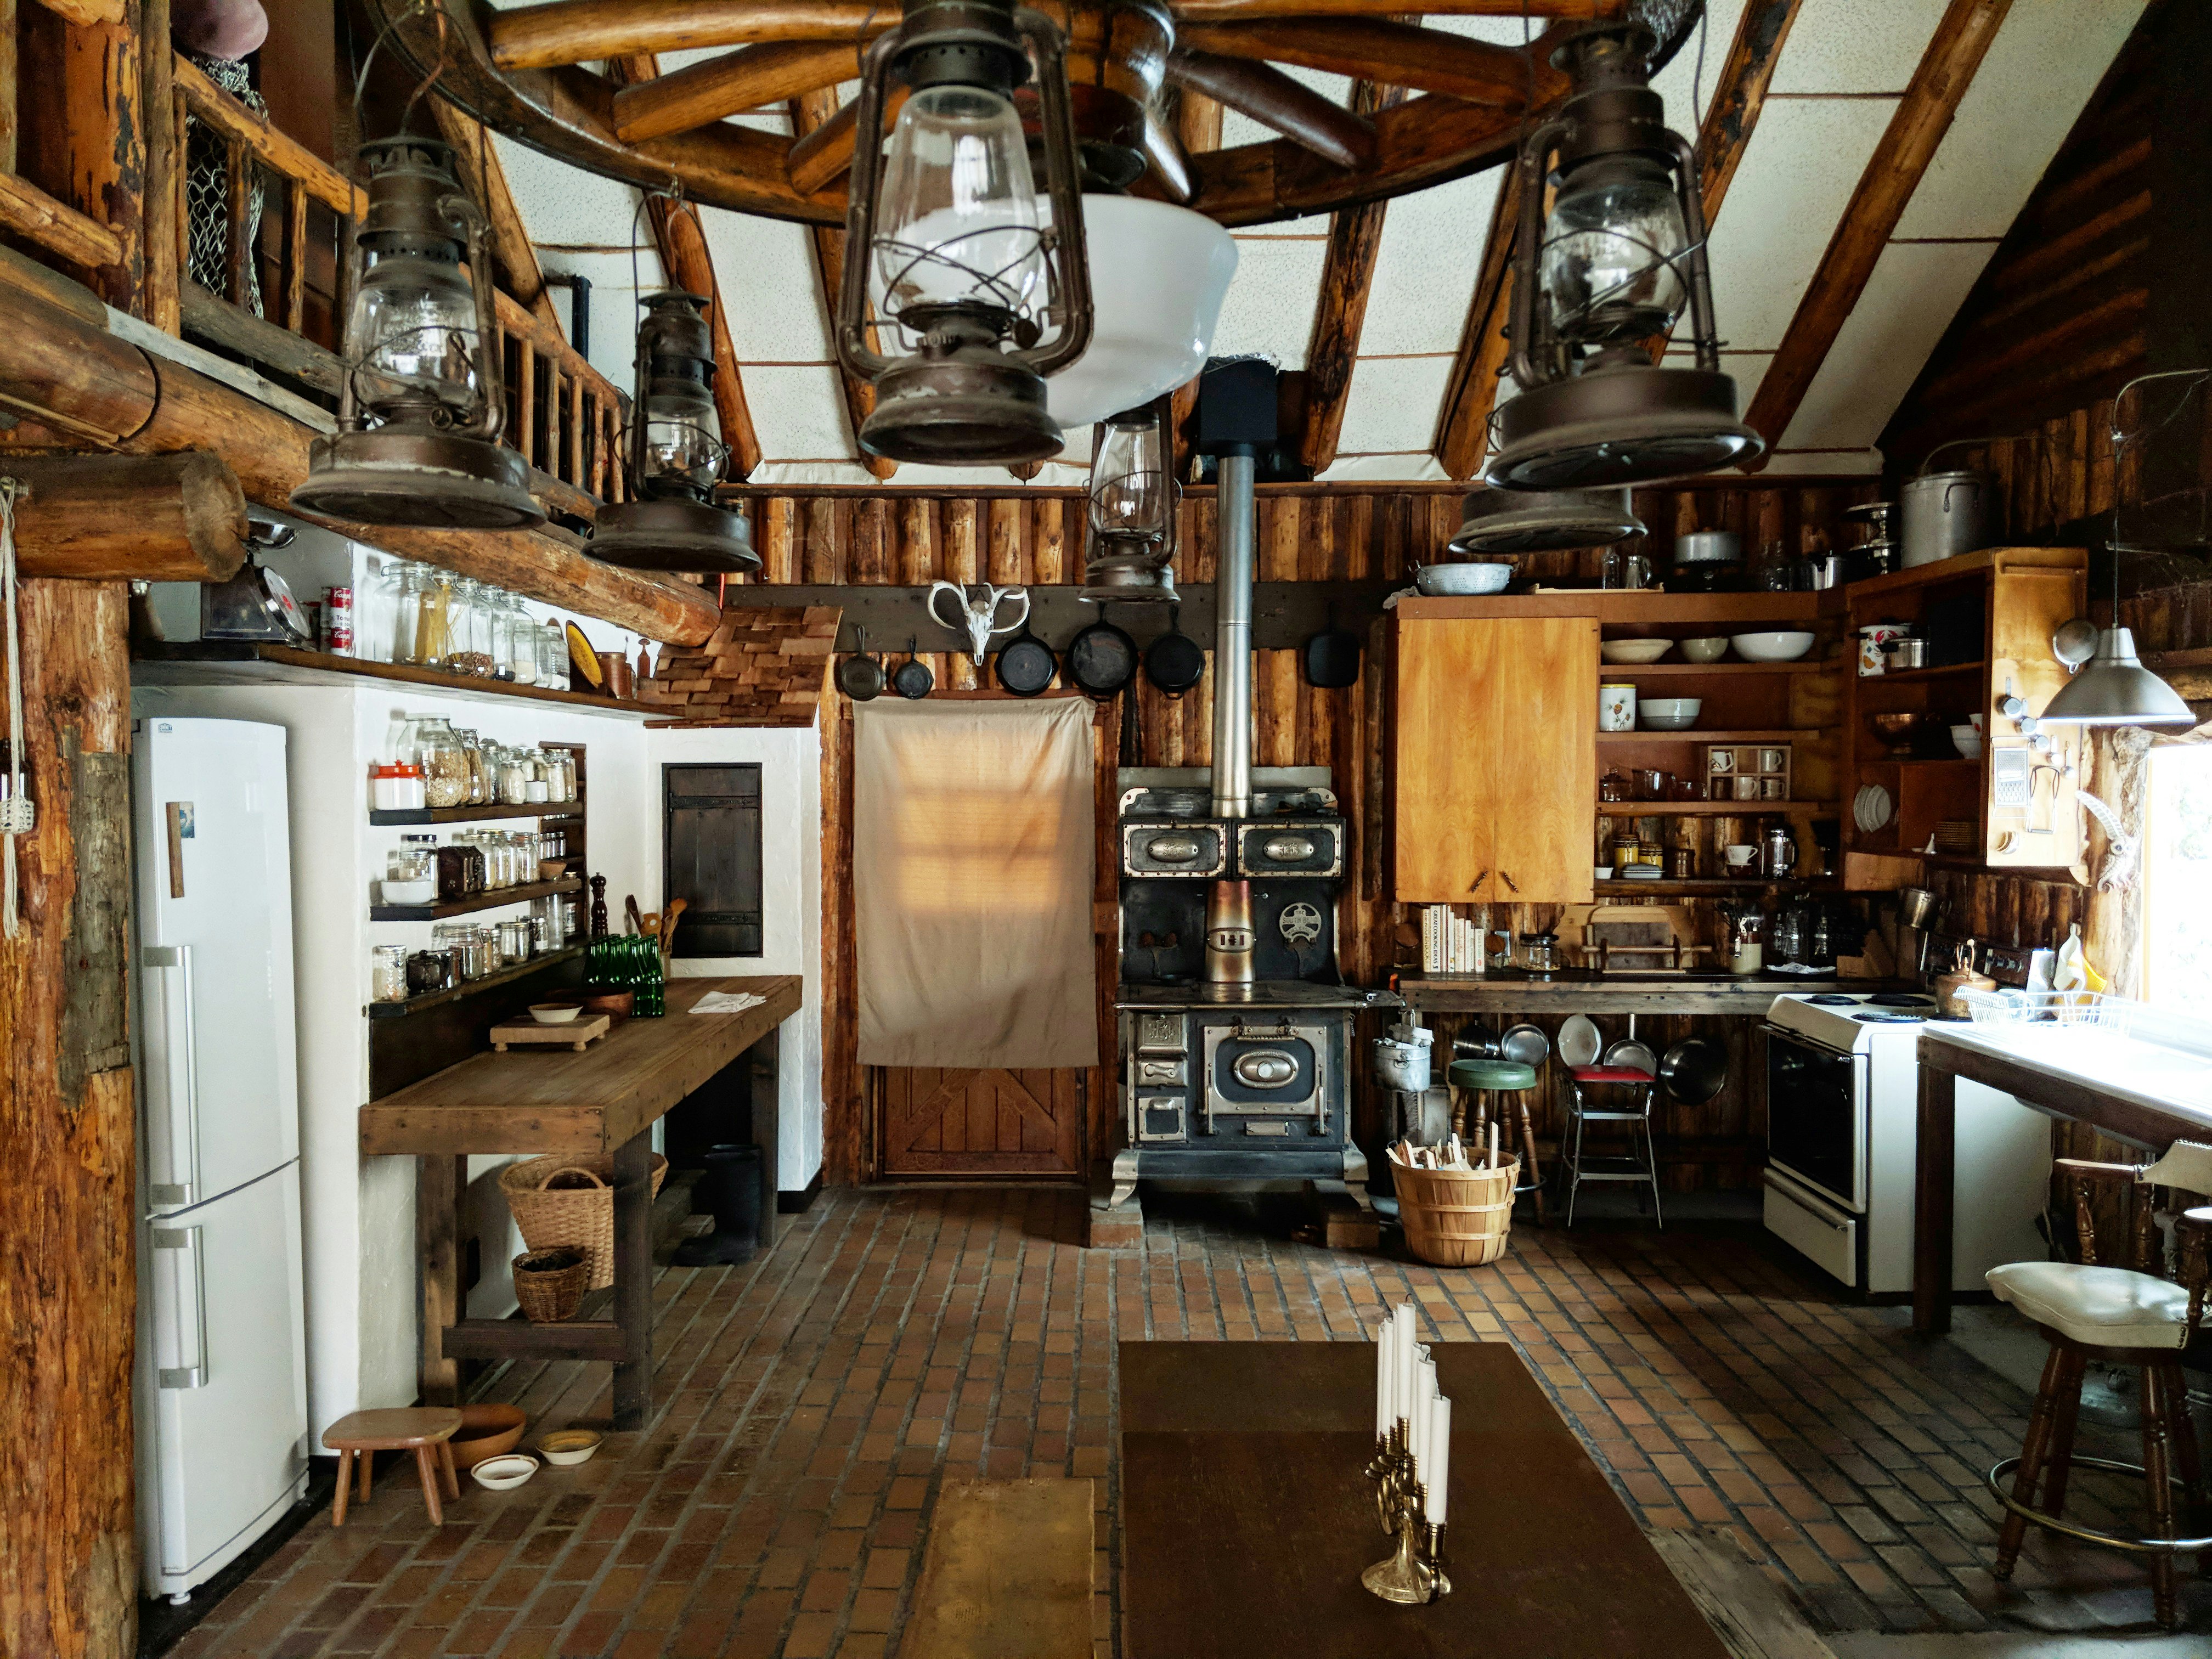 The large, open kitchen area of a cabin. The room is artistically cluttered, with a mixture of mis-matched furniture, and open shelving display crockery and mason jars filled with ingredients.